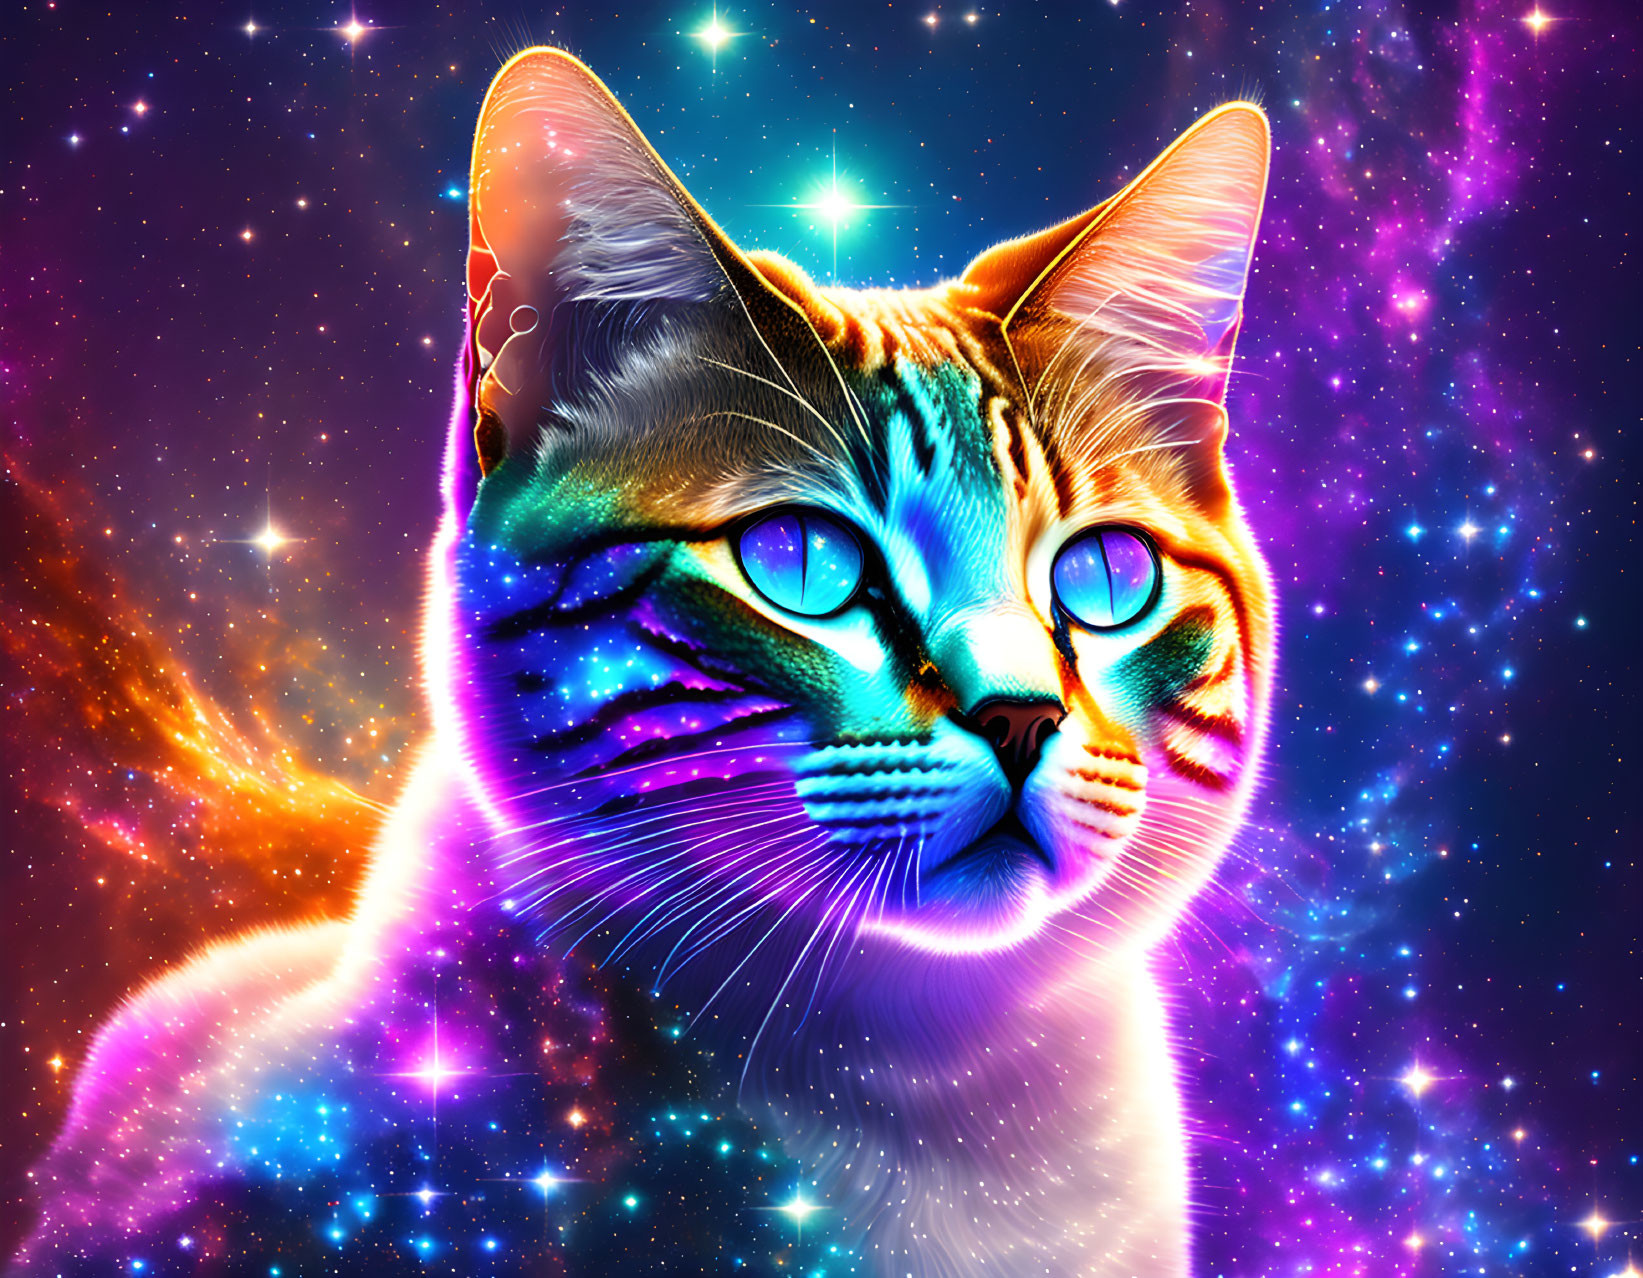 Crystal Cat In The Middle Of The Galaxy